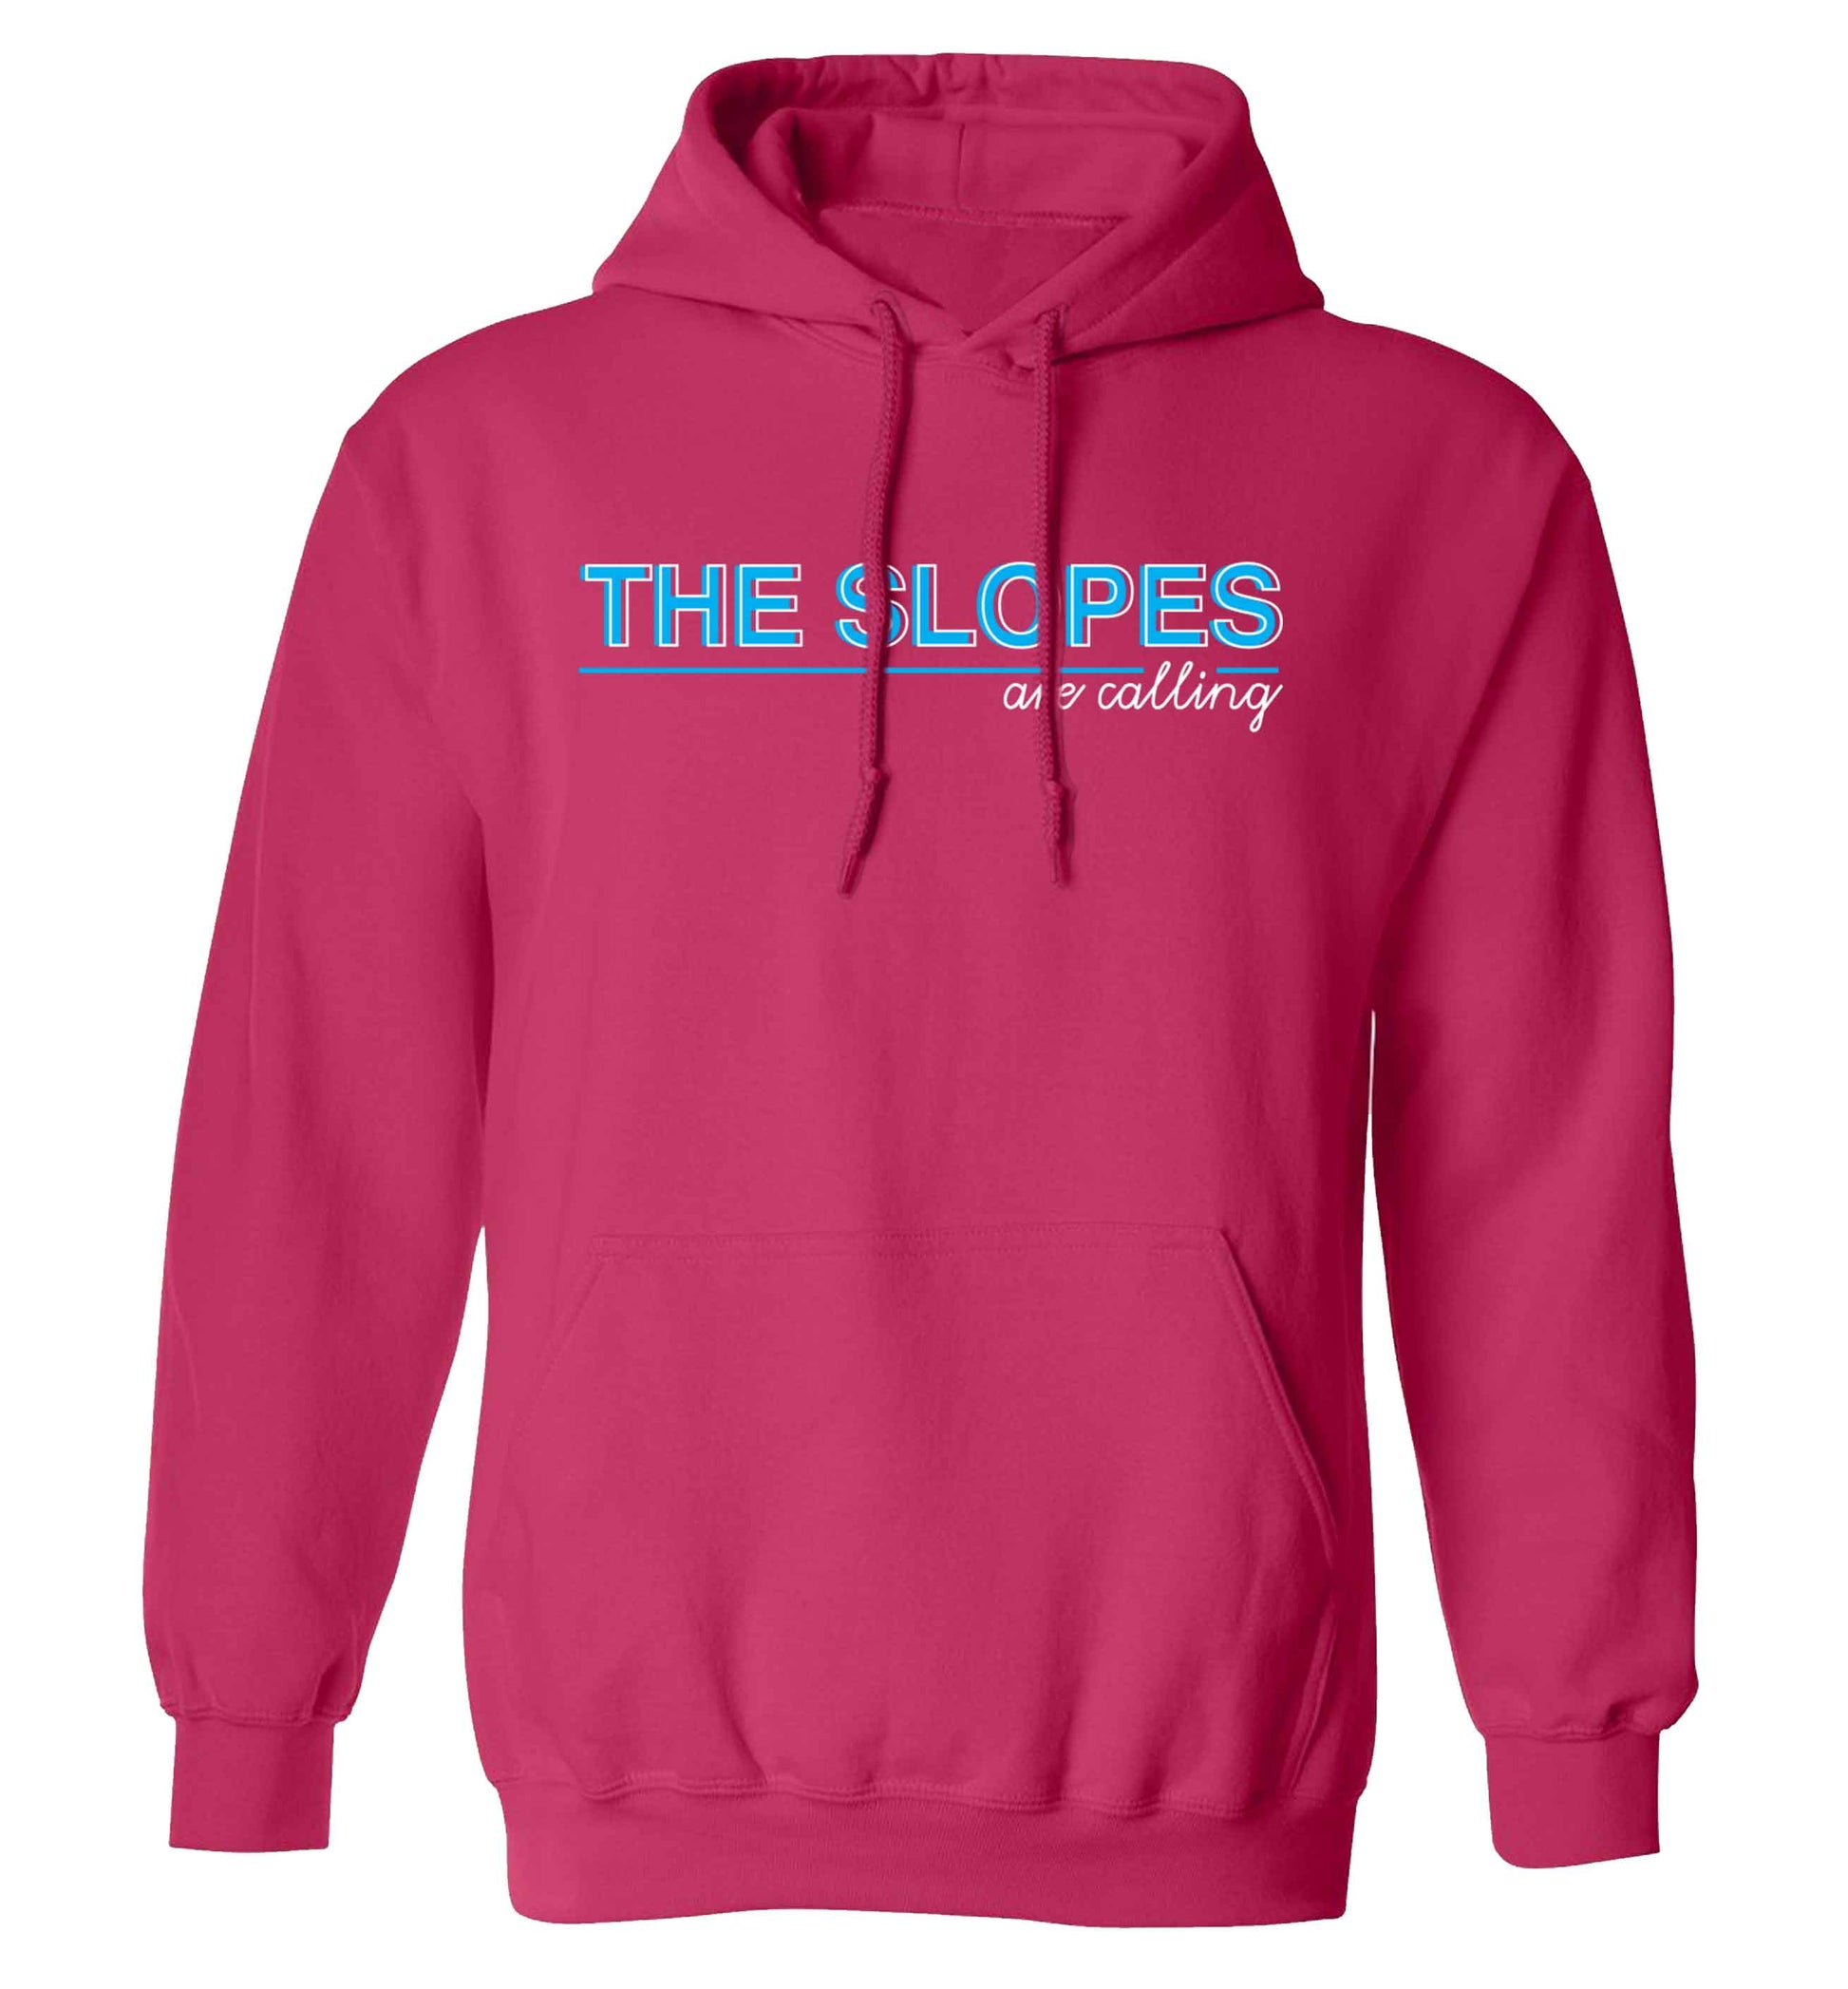 The slopes are calling adults unisex pink hoodie 2XL